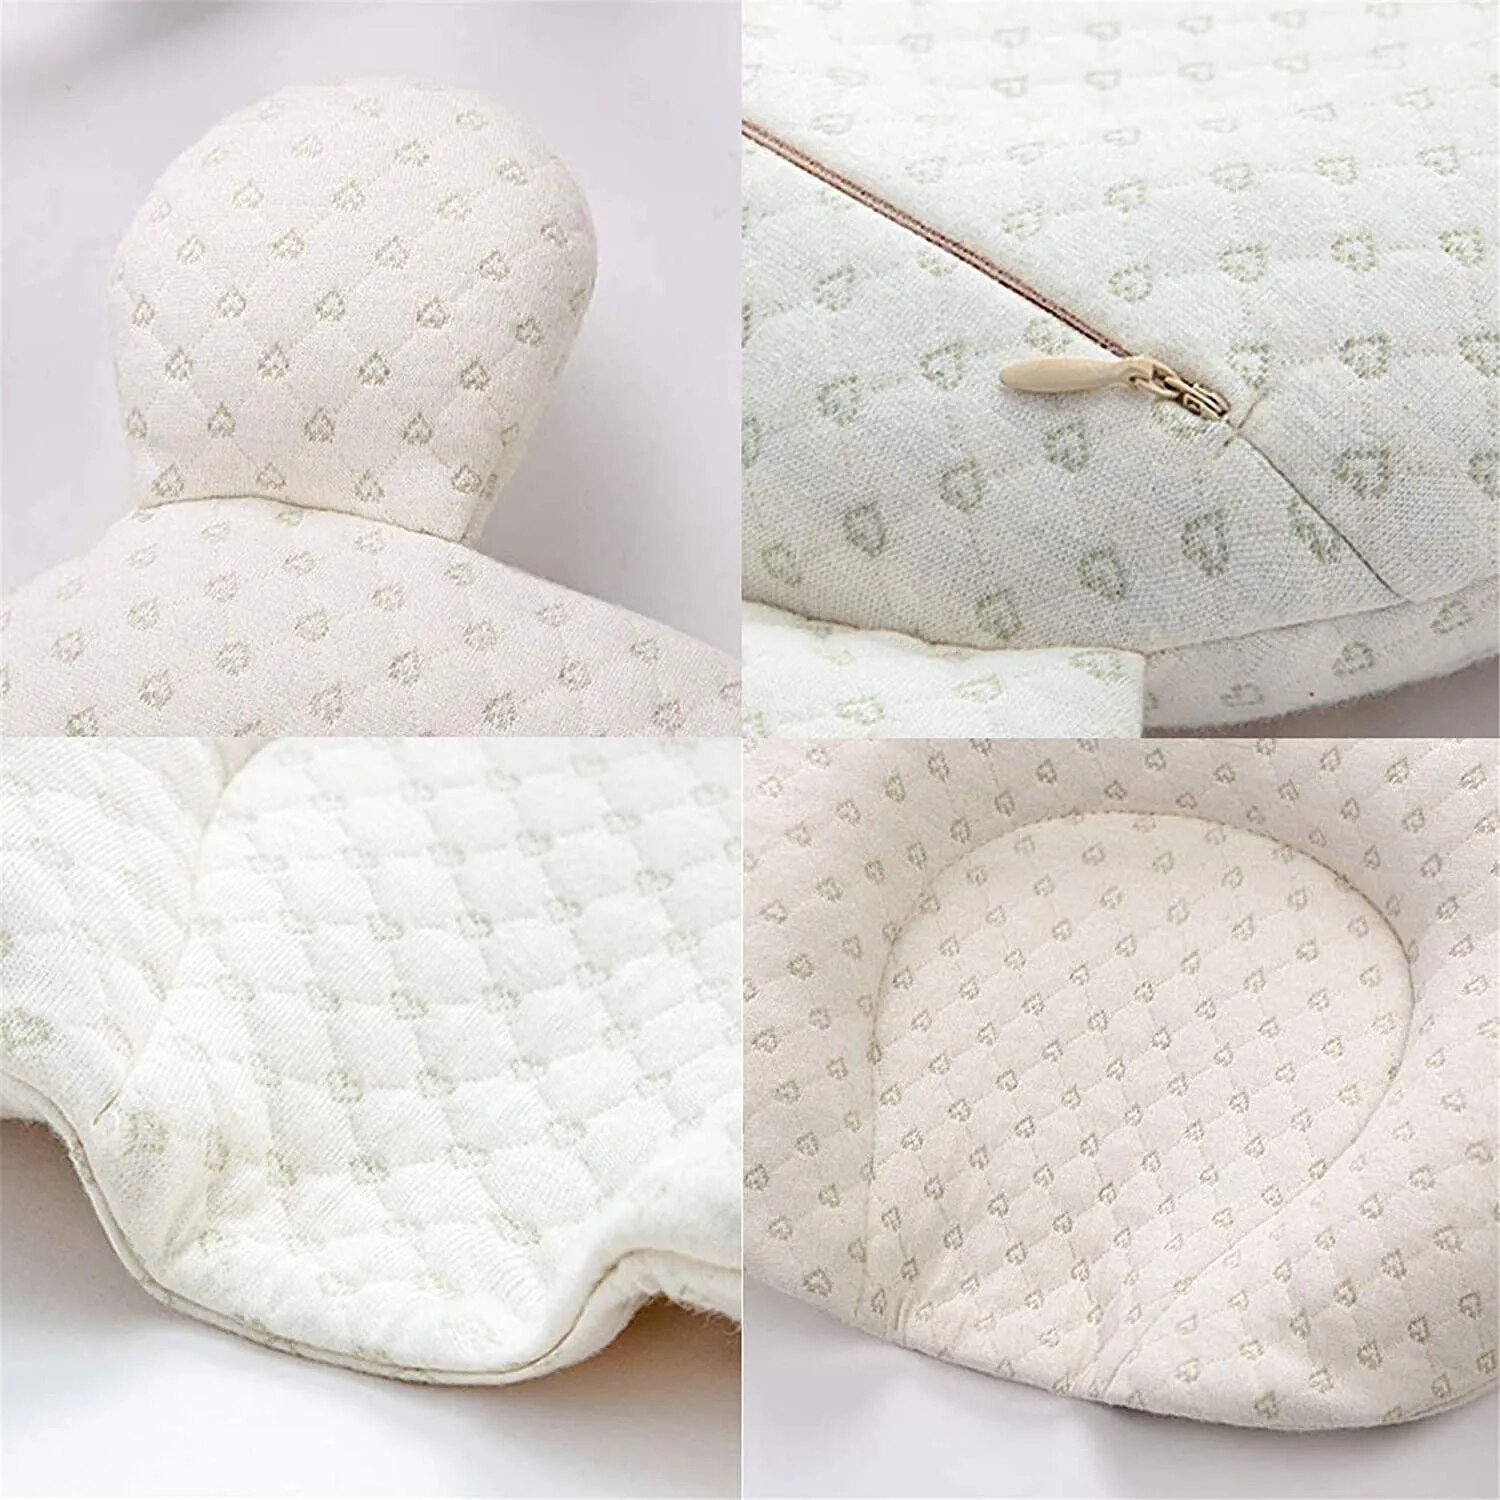 Baby Pillow Newborn Head Protector Cotton Sleeping Protection Pillows Infant Travel Cushion Baby Bedding for 0-1 Years Old